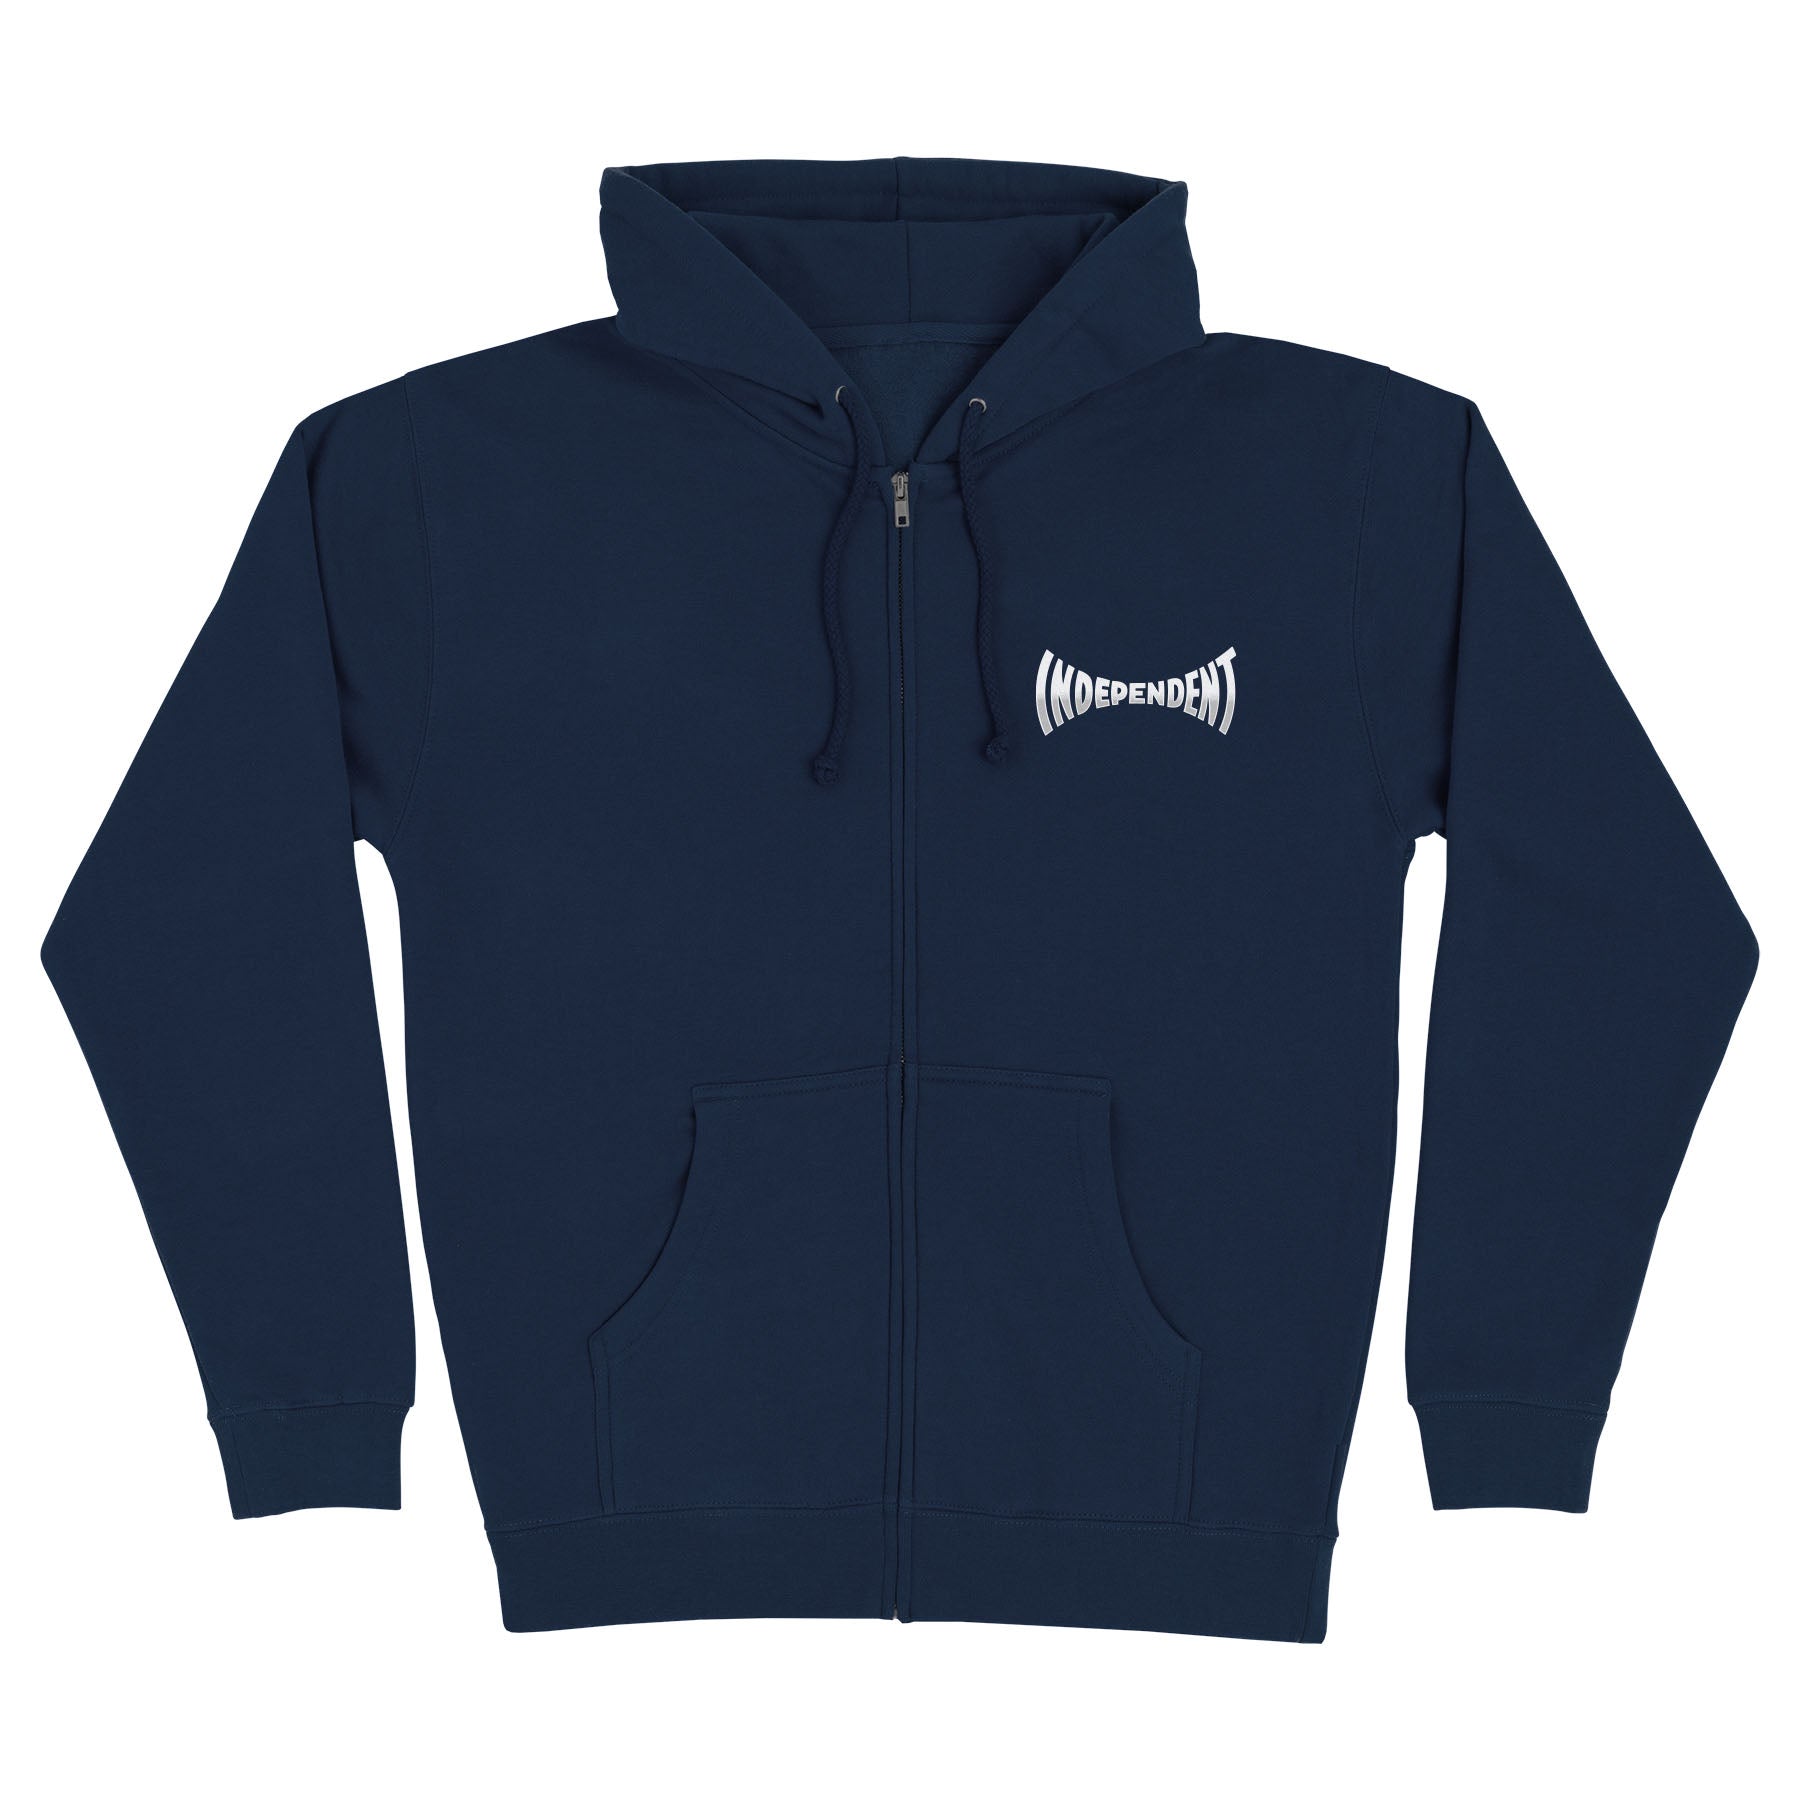 Independent Pavement Span Zip Hooded Heavyweight Sweatshirt Navy Blue - Invisible Board Shop